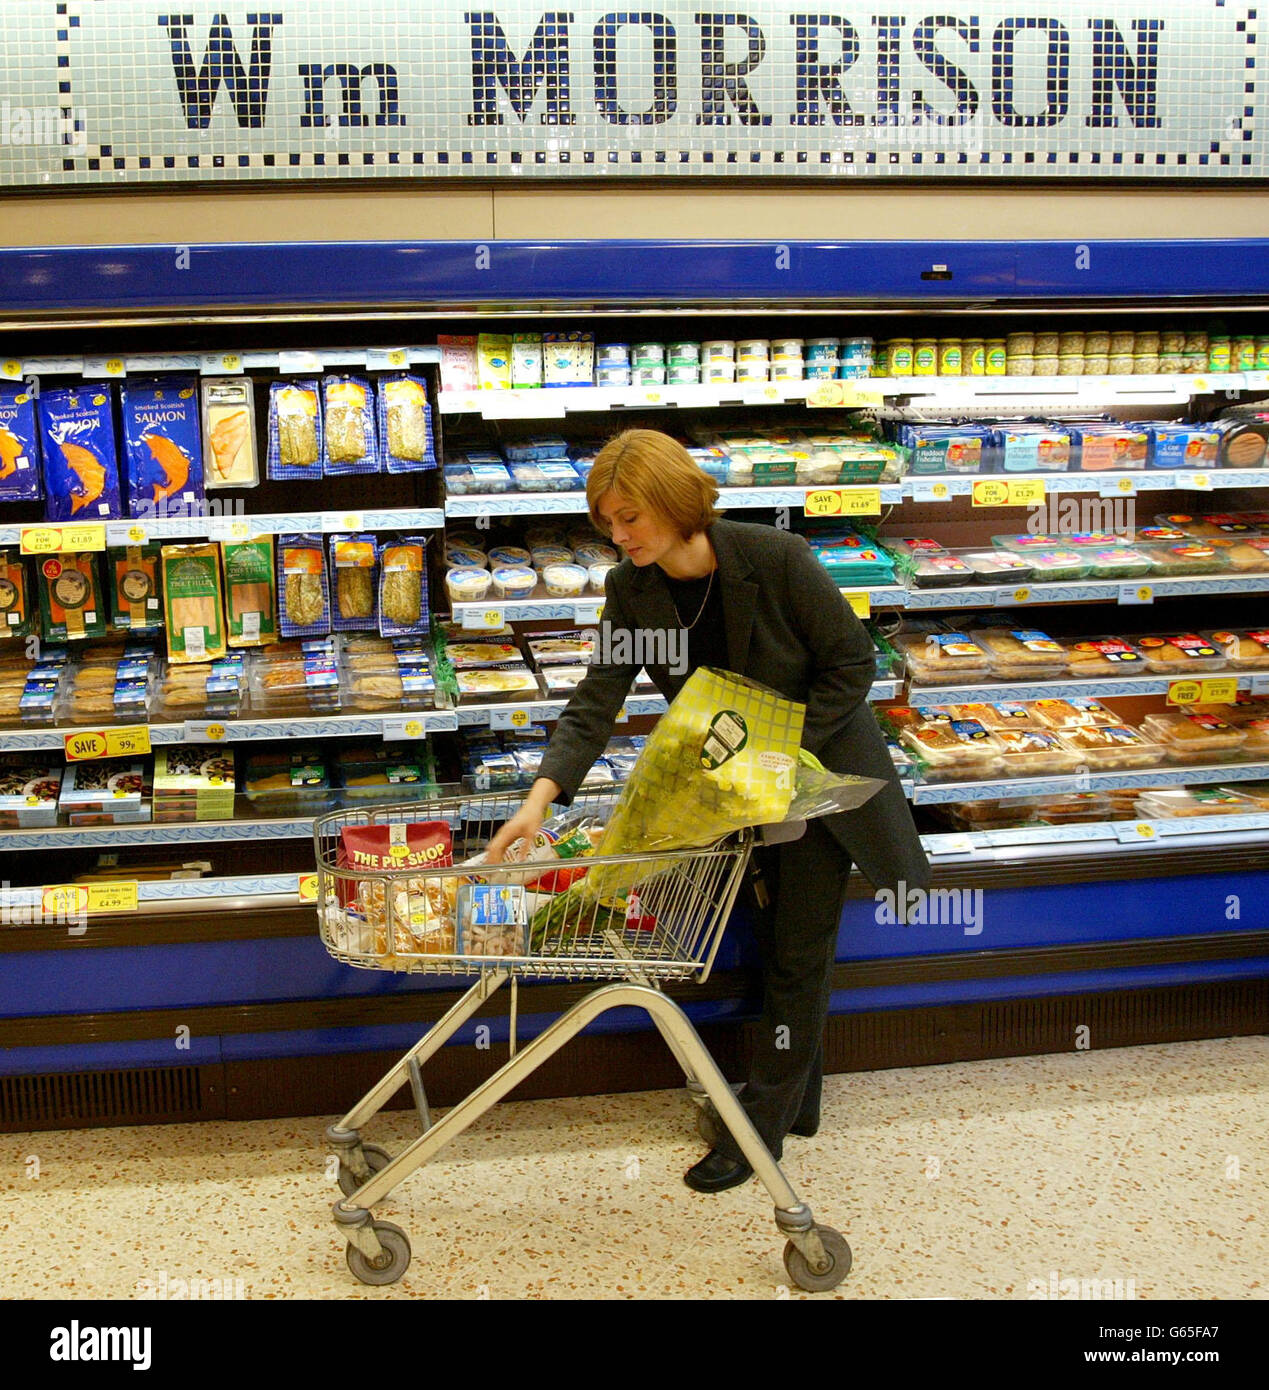 A shopper in Morrison's Supermarket in Winsford, Cheshire. Supermarket giant Sainsbury gatecrashed rival Morrisons agreed takeover of Safeway with details of a bumper 3.2 billion bid. *..The group said it was considering an offer of at least 300p per share in a move that is certain to spark a bidding war in the sector. Analysts believe Asda, backed by the might of its US owner Wal-Mart, will now declare its hand and trump both bids currently on the table. The mounting speculation was enough to push Safeway shares up by 5% in the City - its market value has soared 37% in under a week. Stock Photo